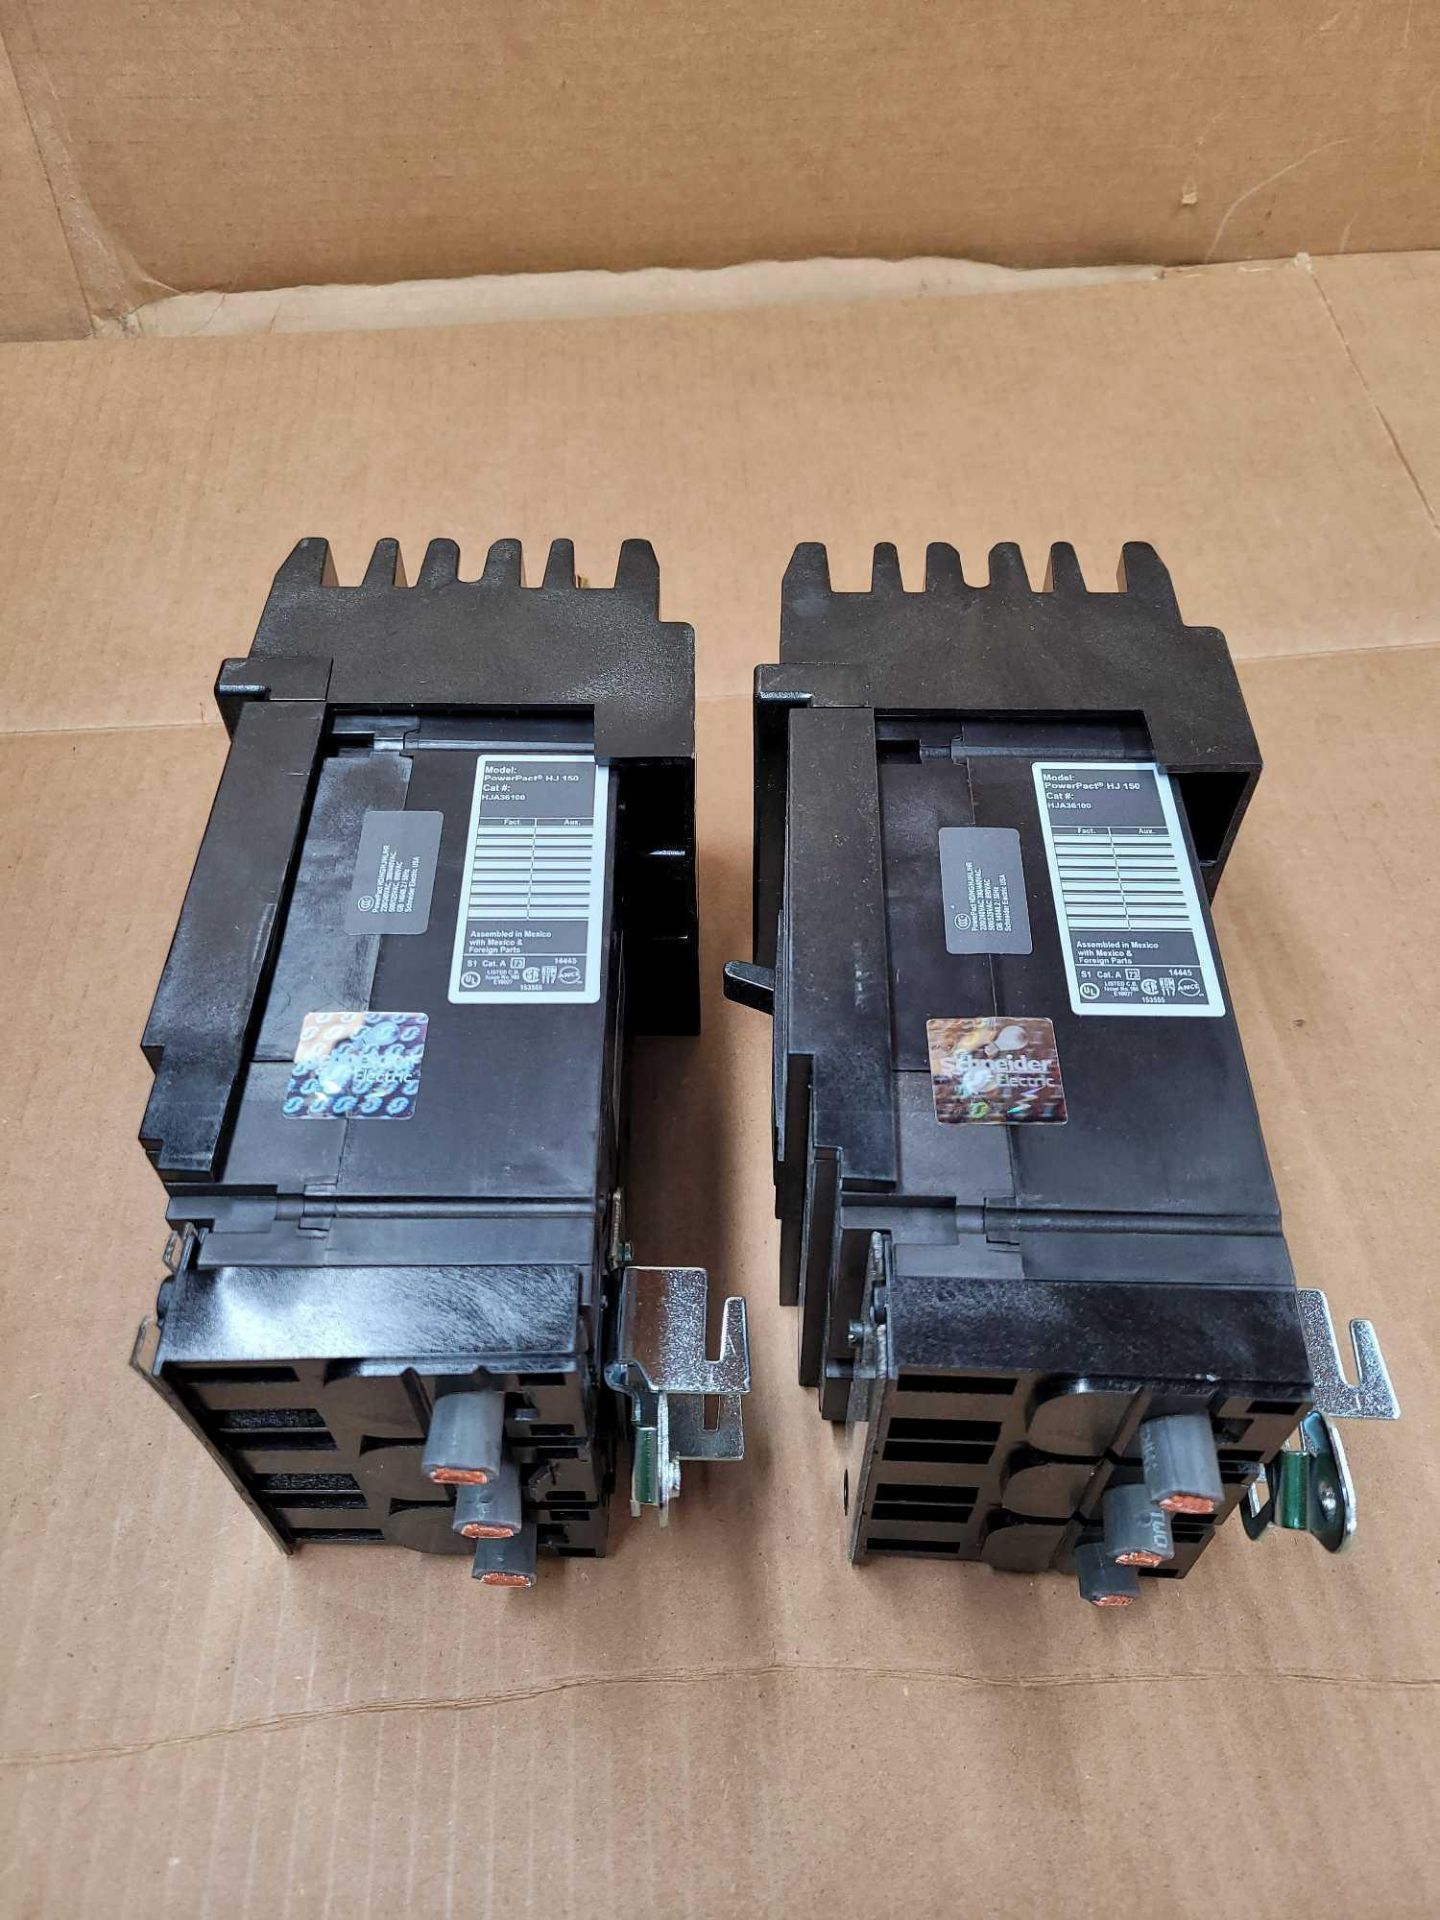 LOT OF 2 SQUARE D HJA36100 / 100 Amp Molded Case Circuit Breaker  /  Lot Weight: 9.4 lbs - Image 2 of 5